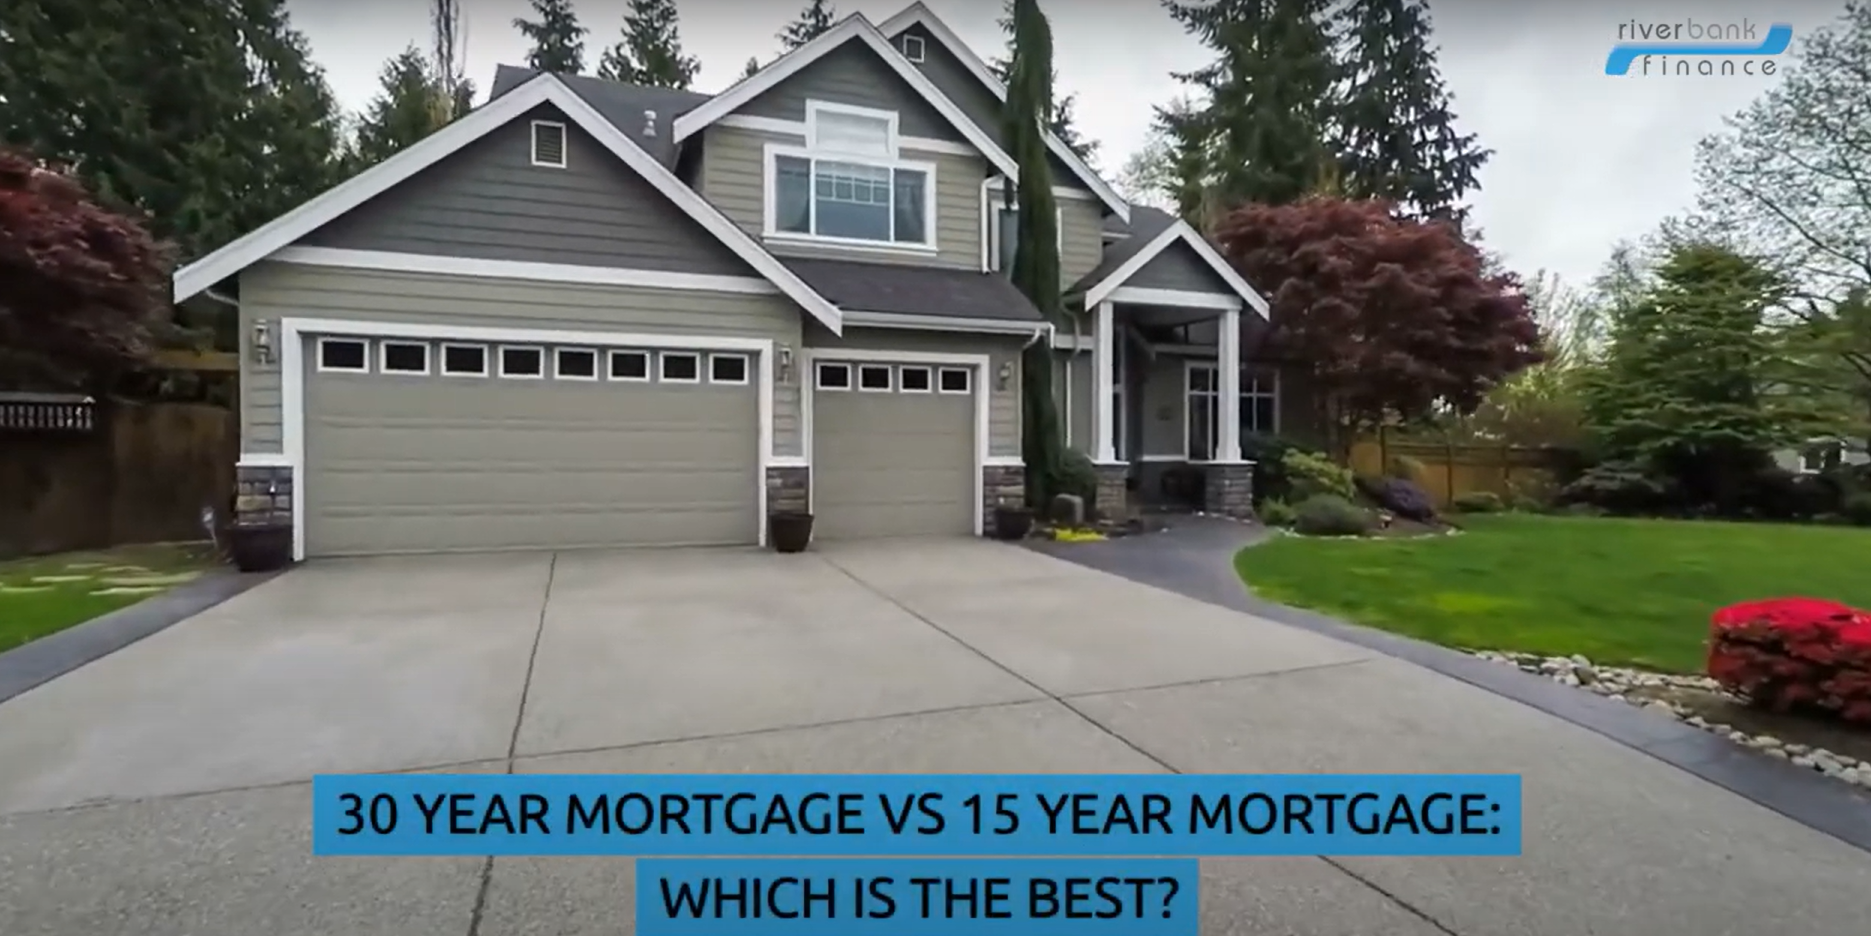 Deciding between a 30 year or 15 year mortgage term.